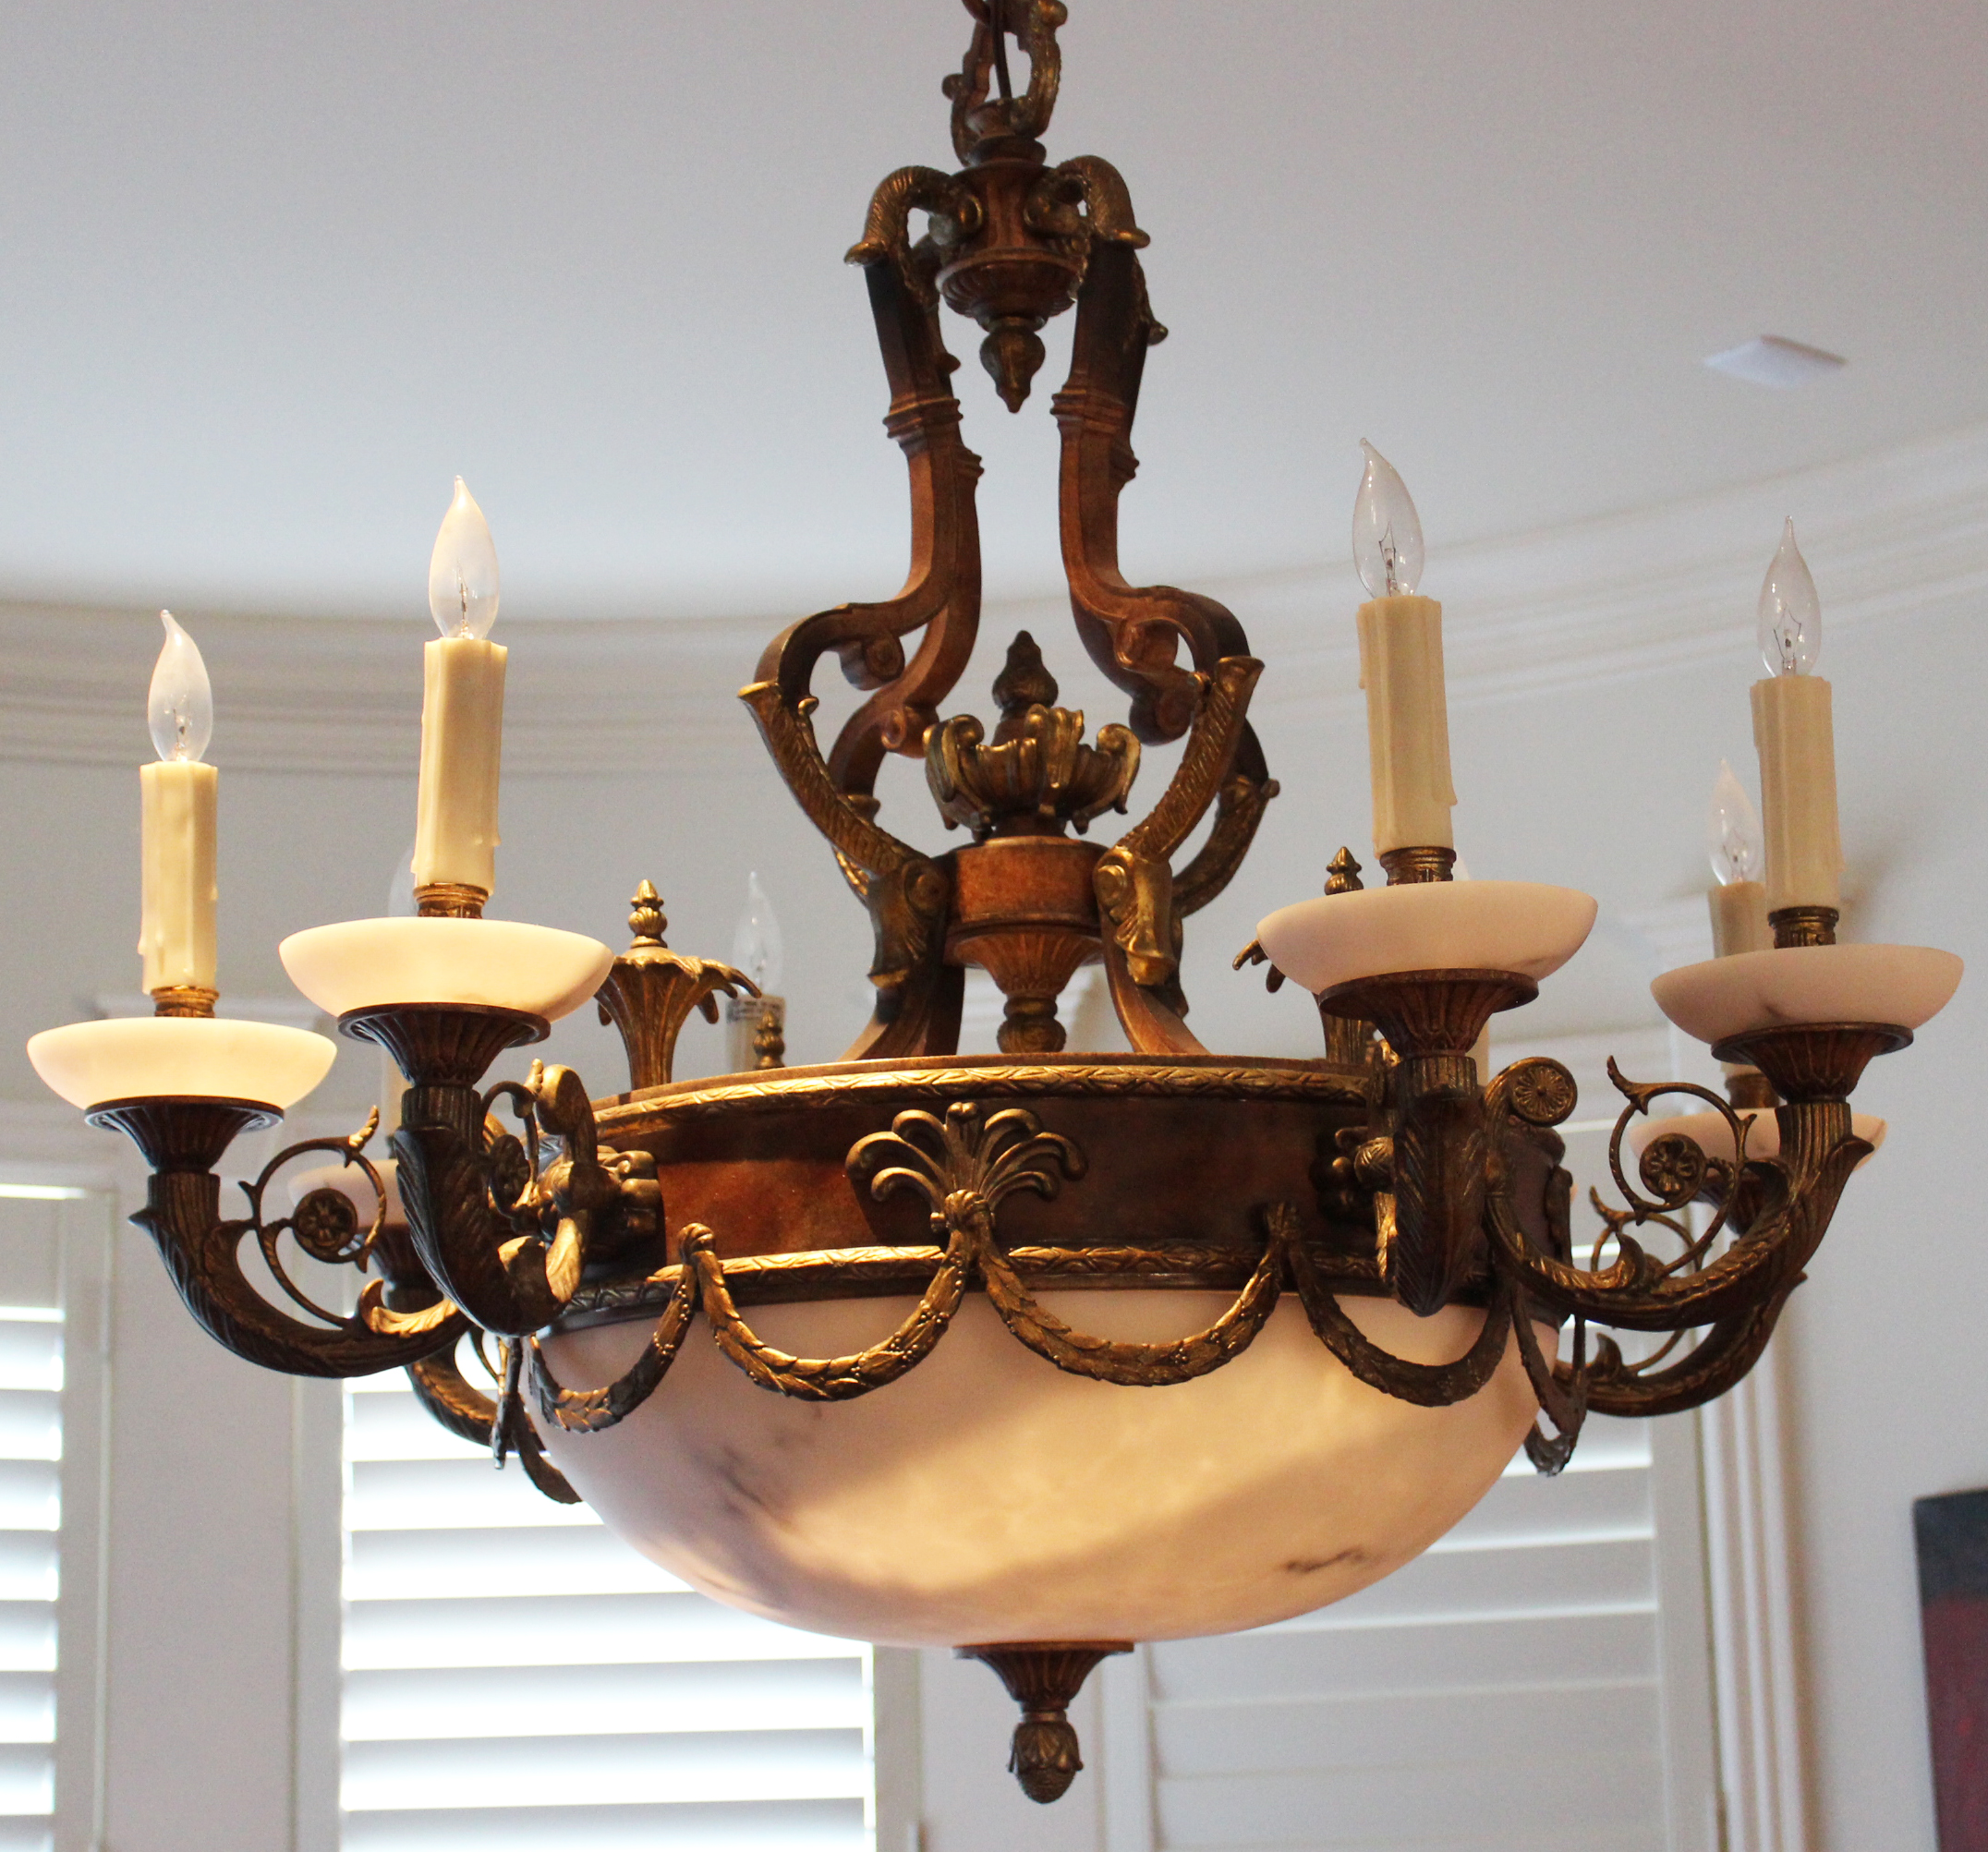 LARGE EMPIRE STYLE CHANDELIER LARGE 35fb6b